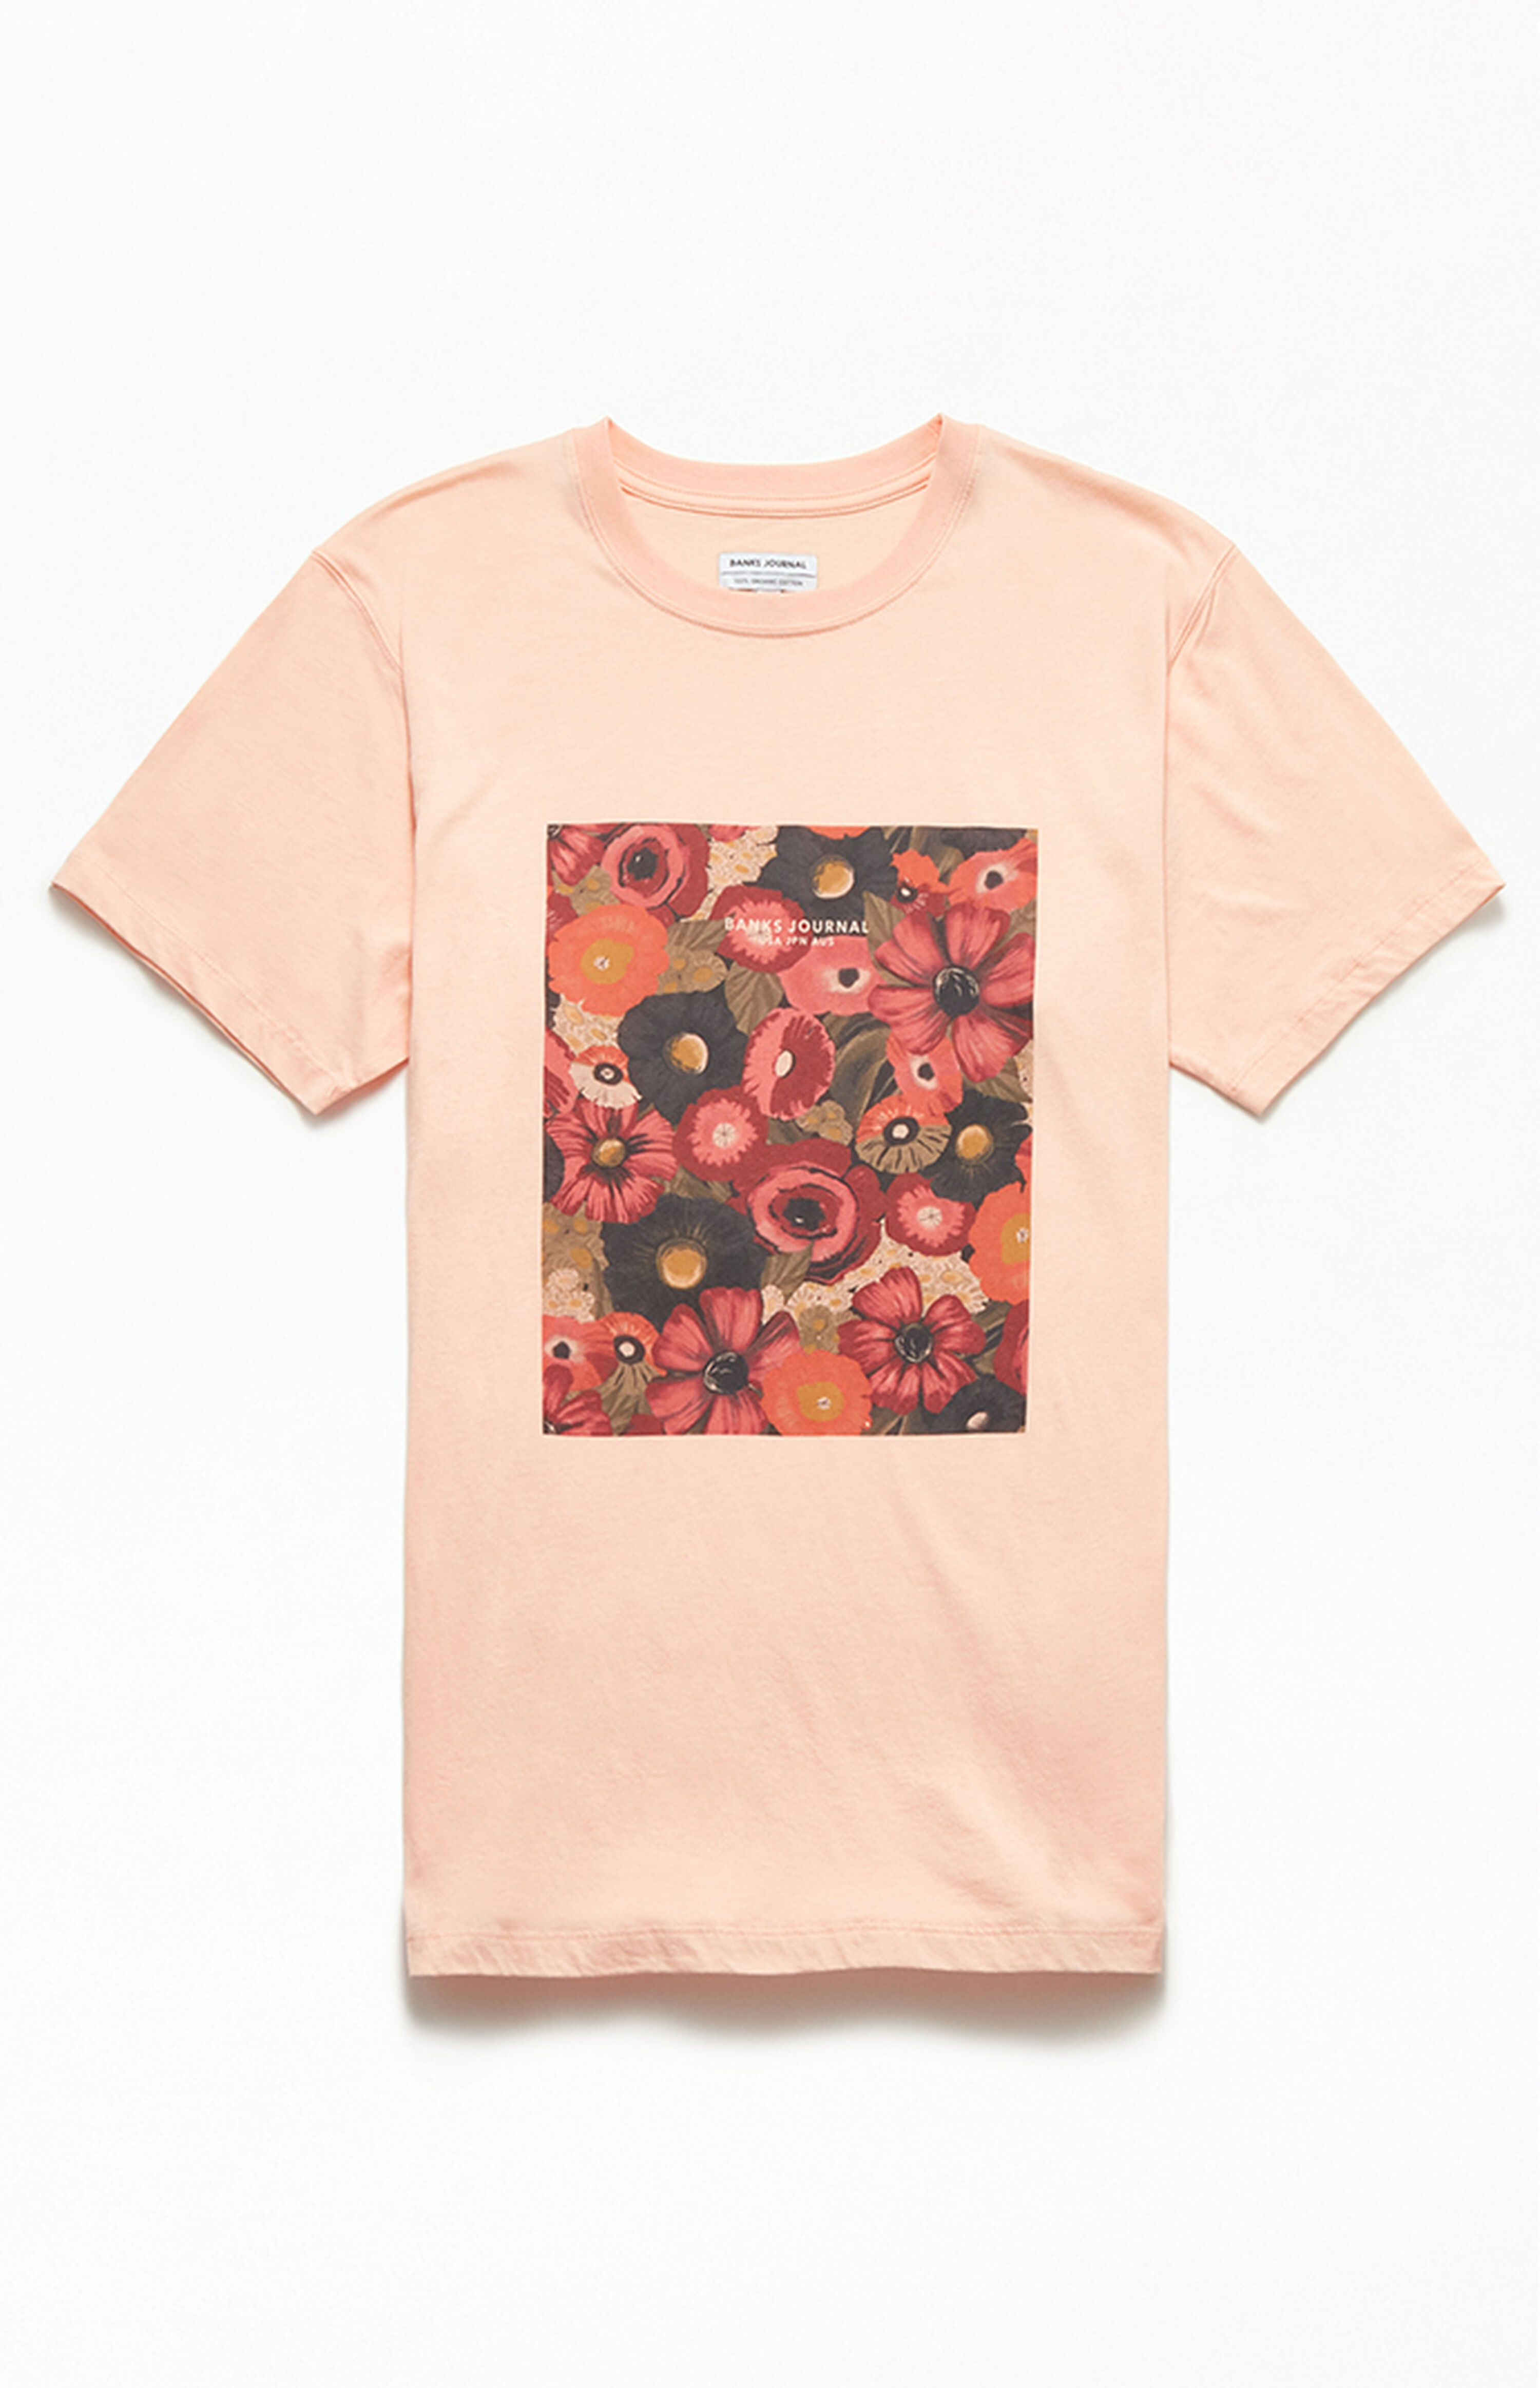 Graphic Tees: Men's Graphic T-Shirts | PacSun